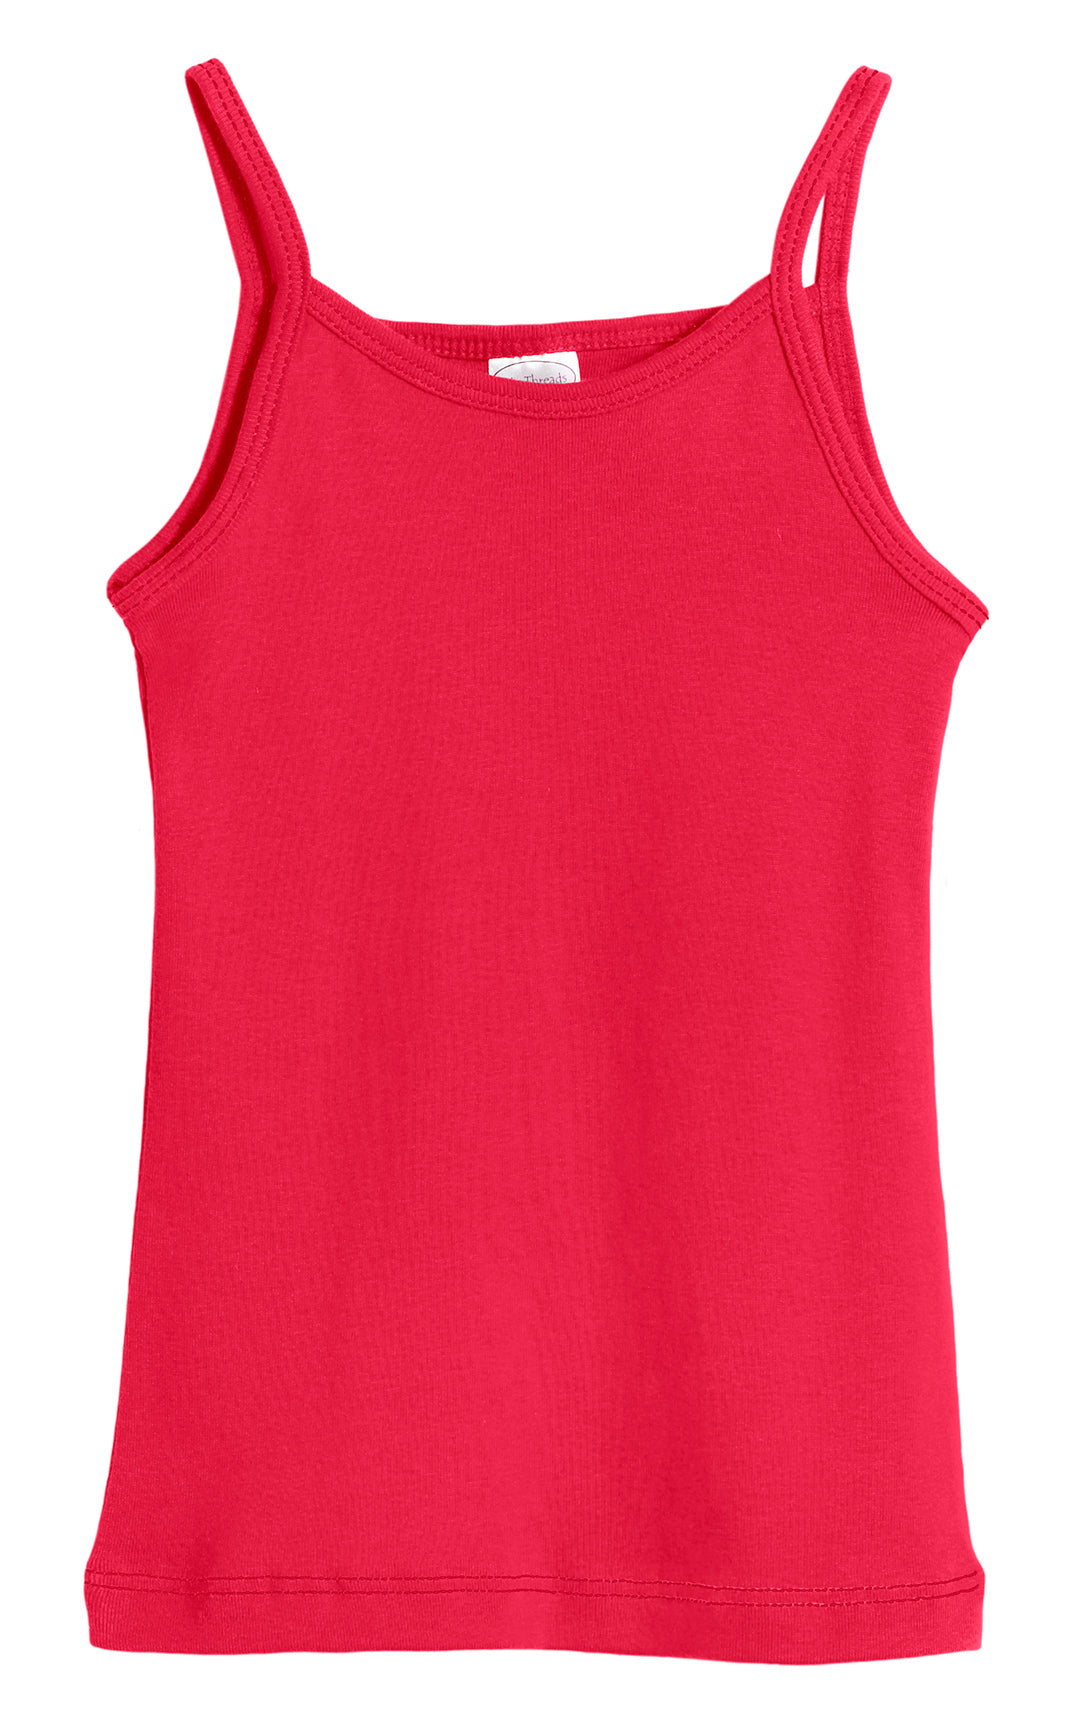 Girls Novelty Lined Camisole - City Threads USA